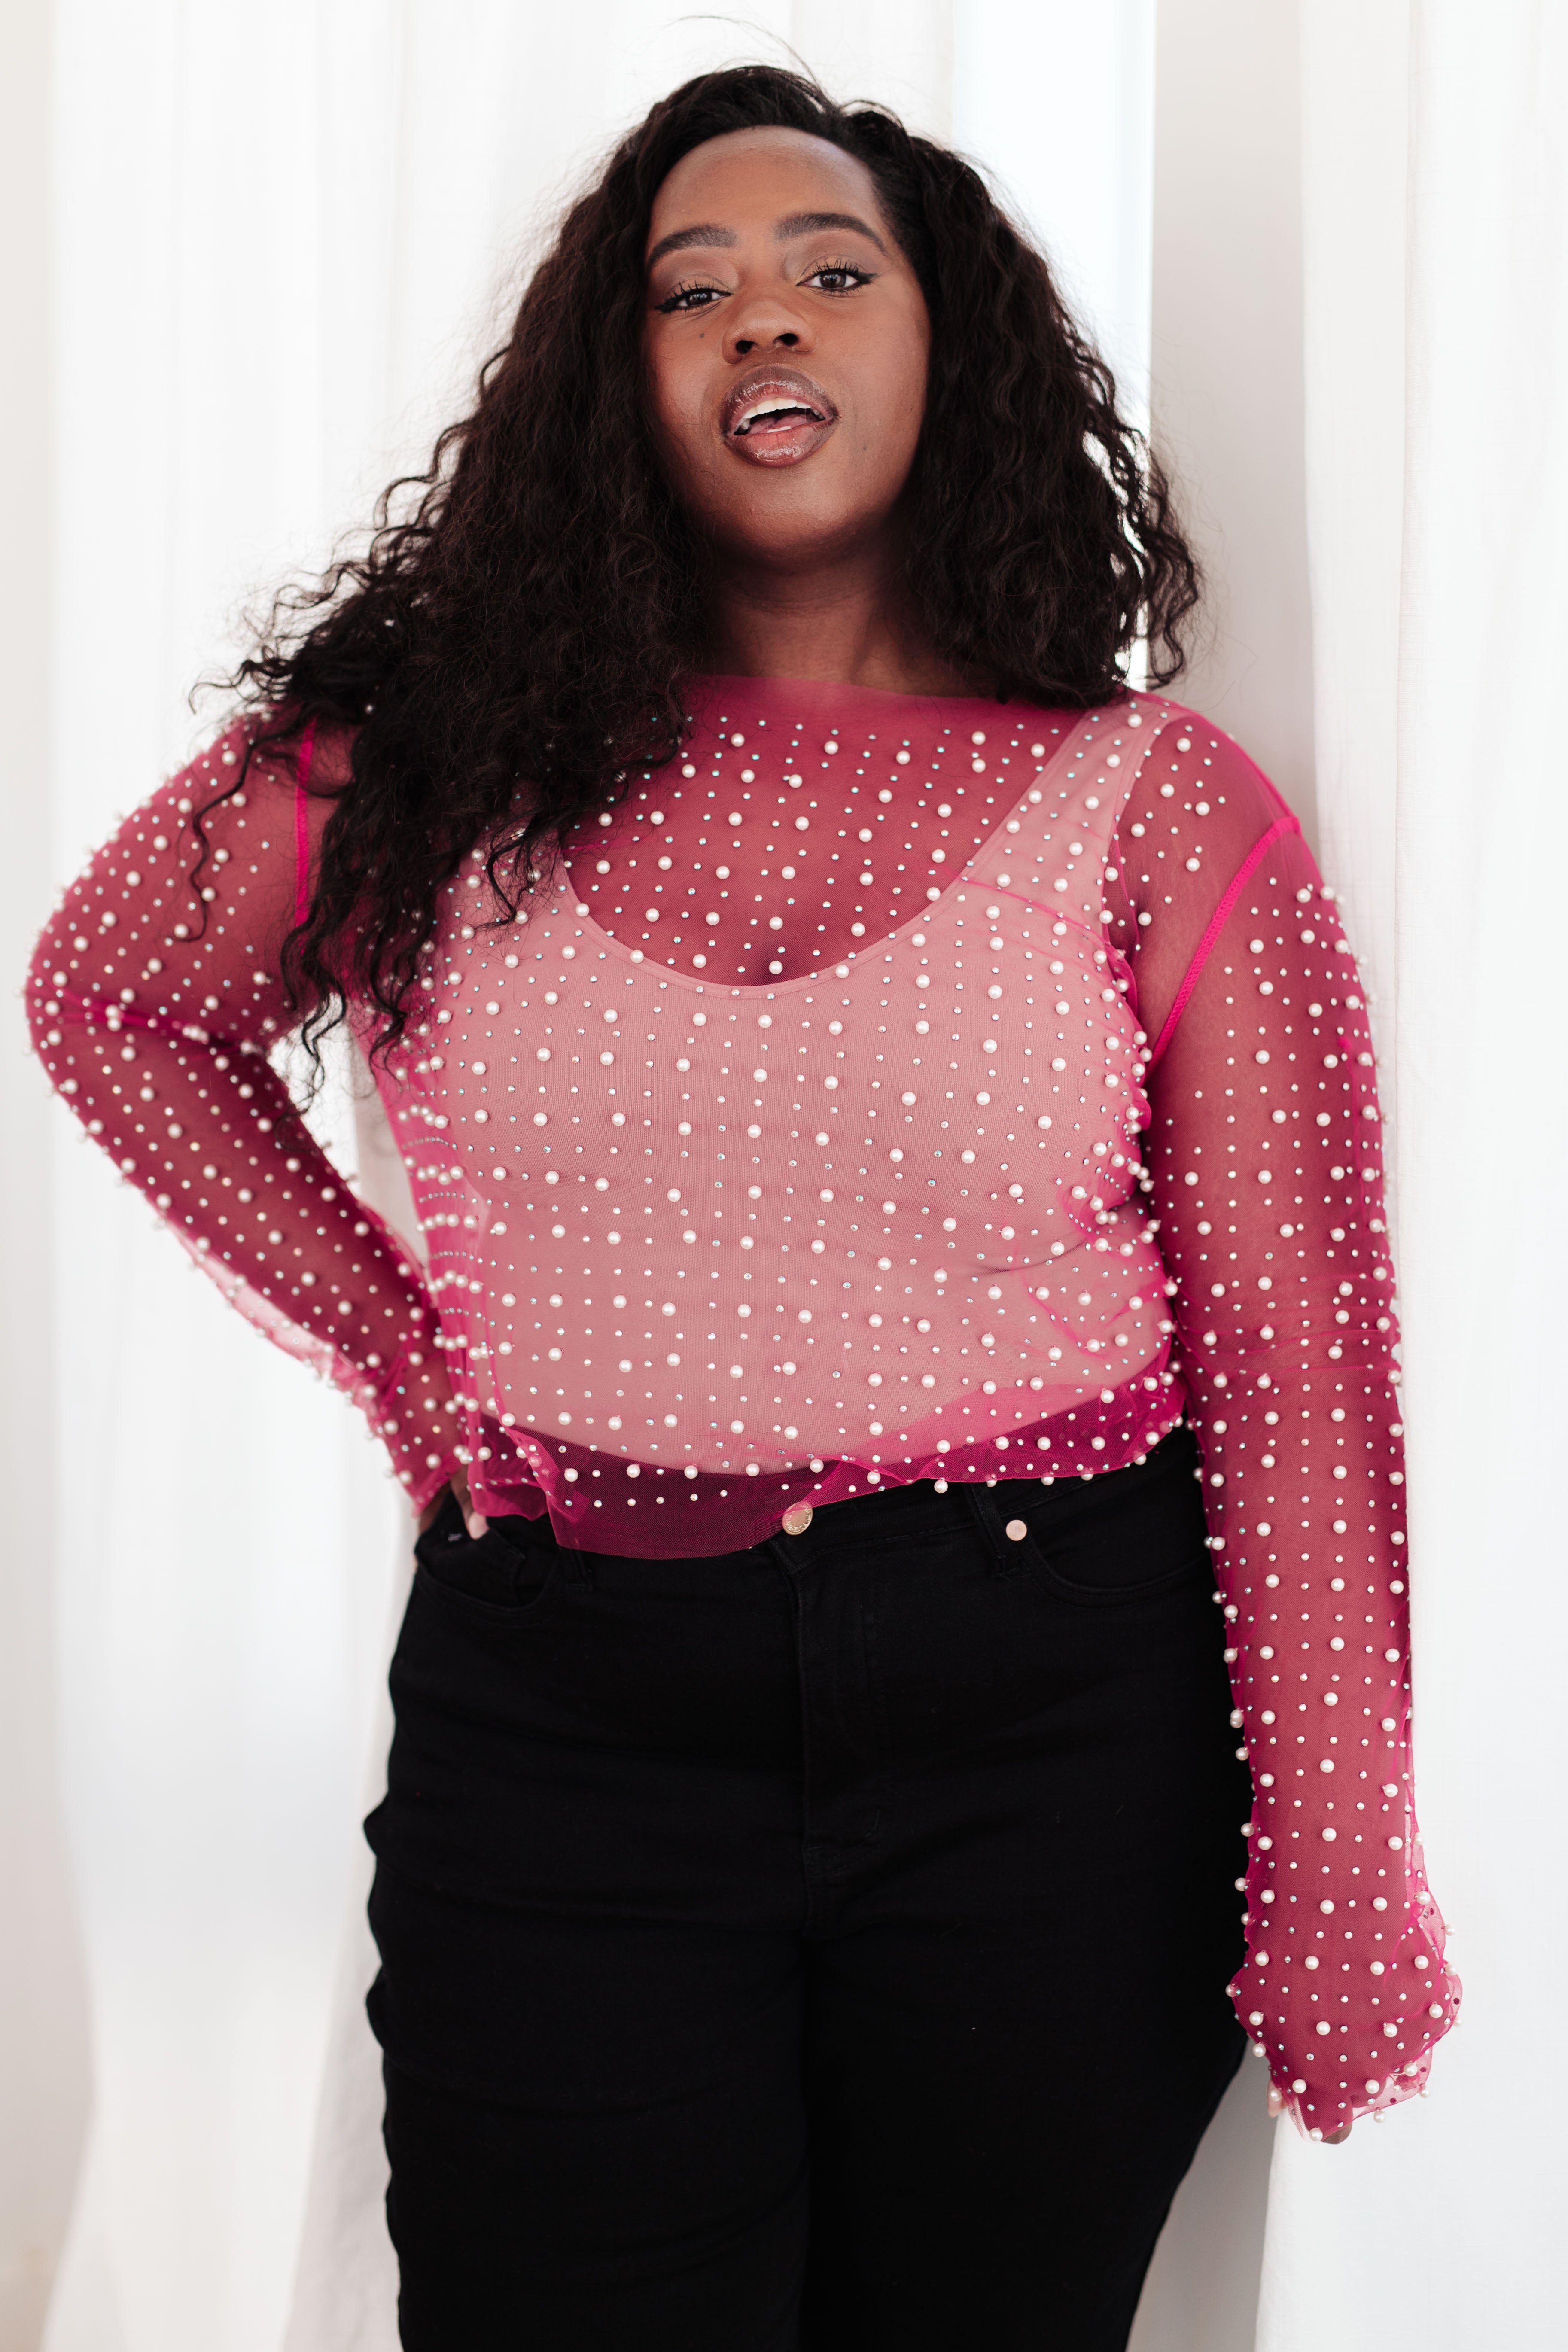 Pearl Diver Layering Top in Pink - Lola Cerina Boutique